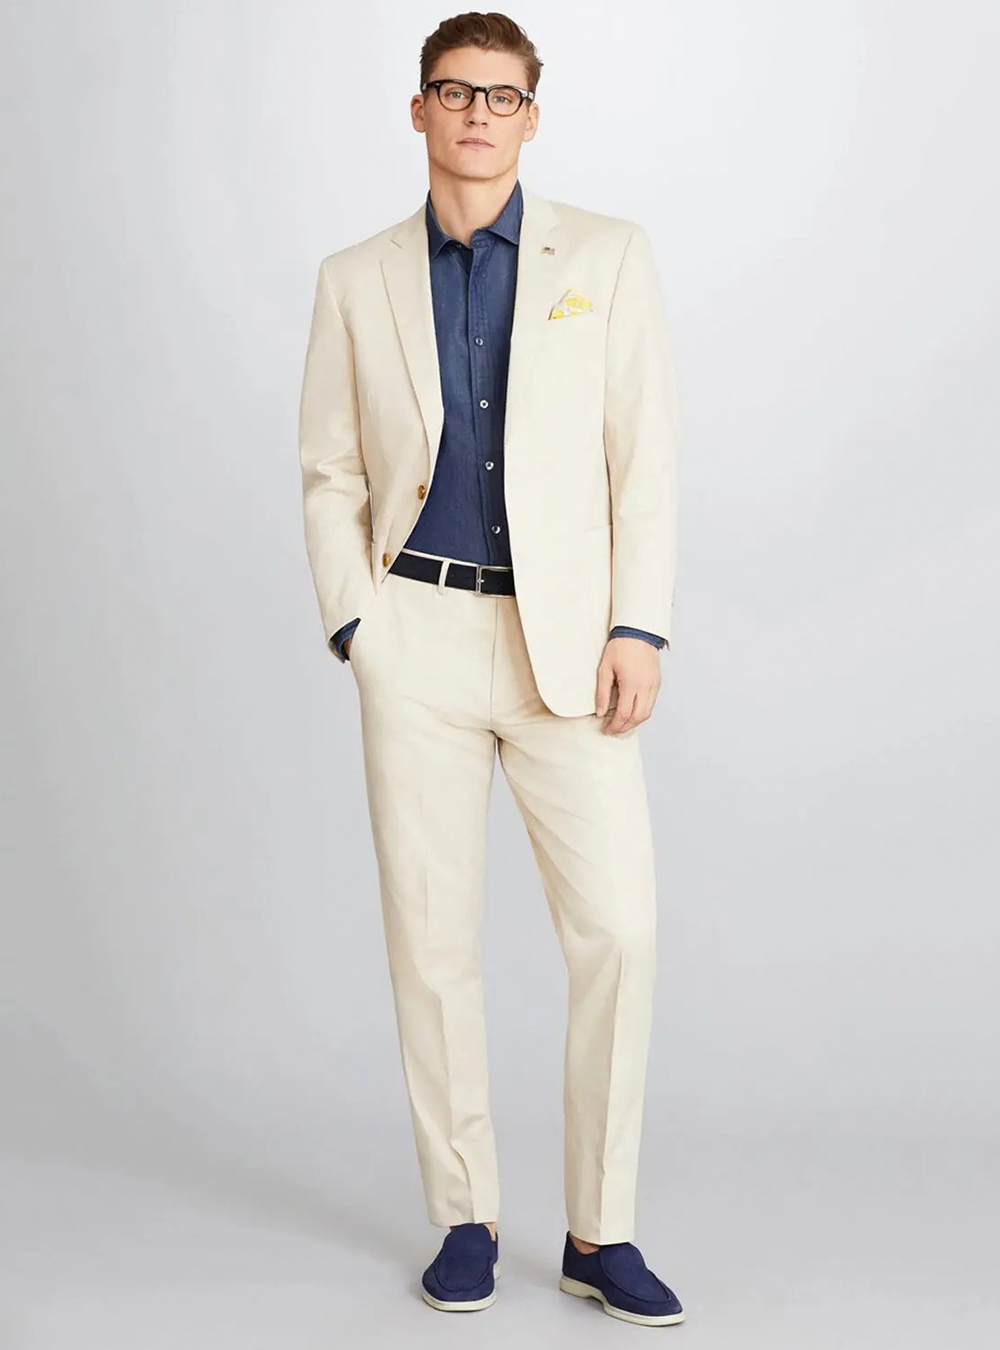 tan suit, denim shirt, and navy blue loafers